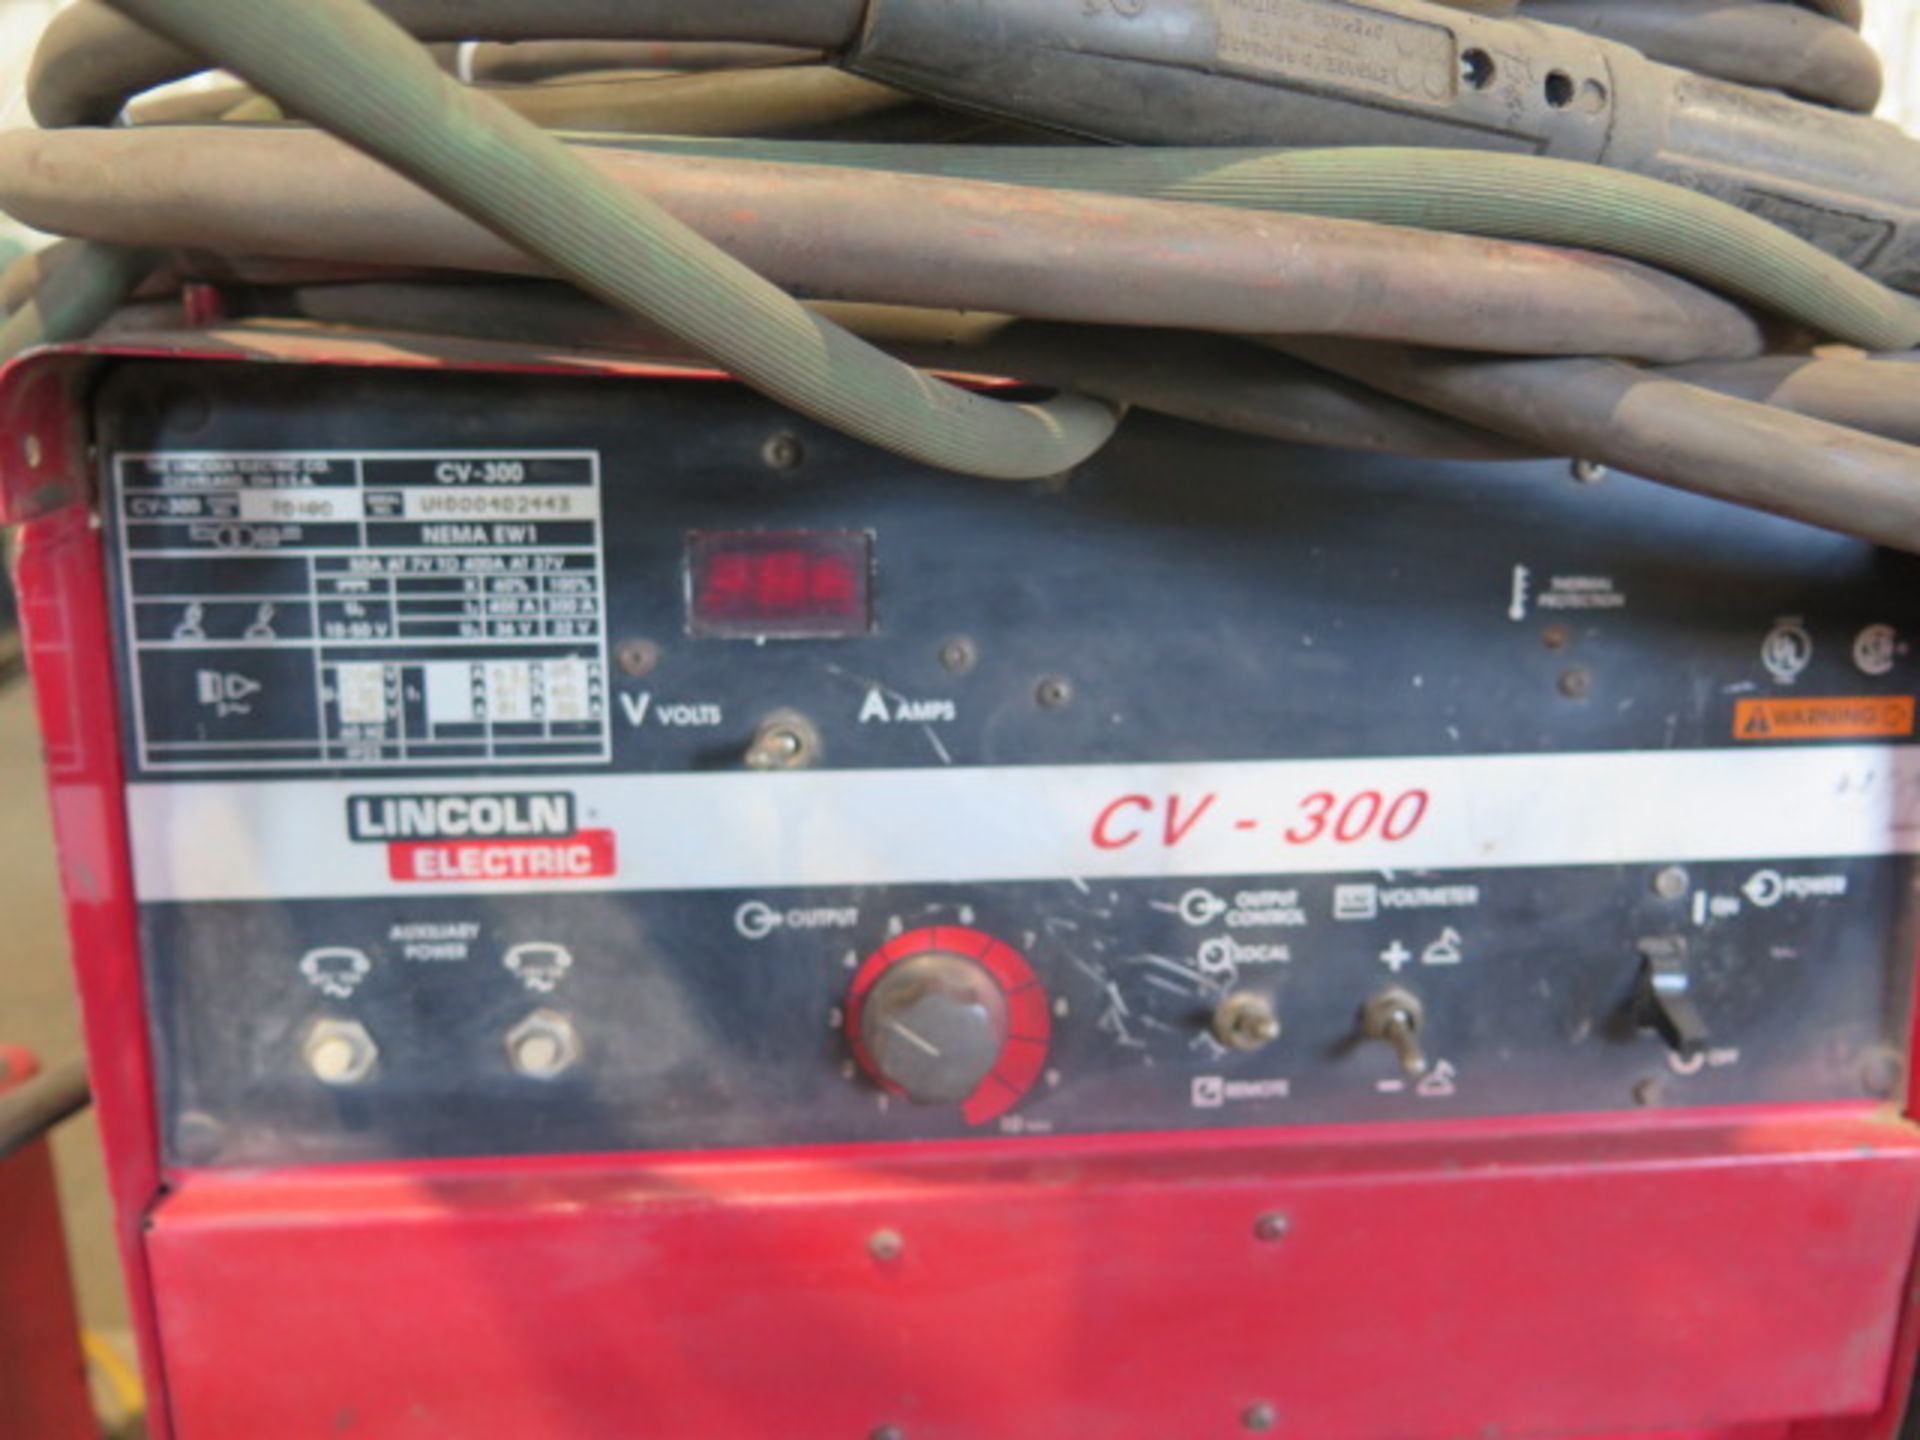 Lincoln CV-300 Arc Welding Power Source w/ Stand (SOLD AS-IS - NO WARRANTY) - Image 5 of 5